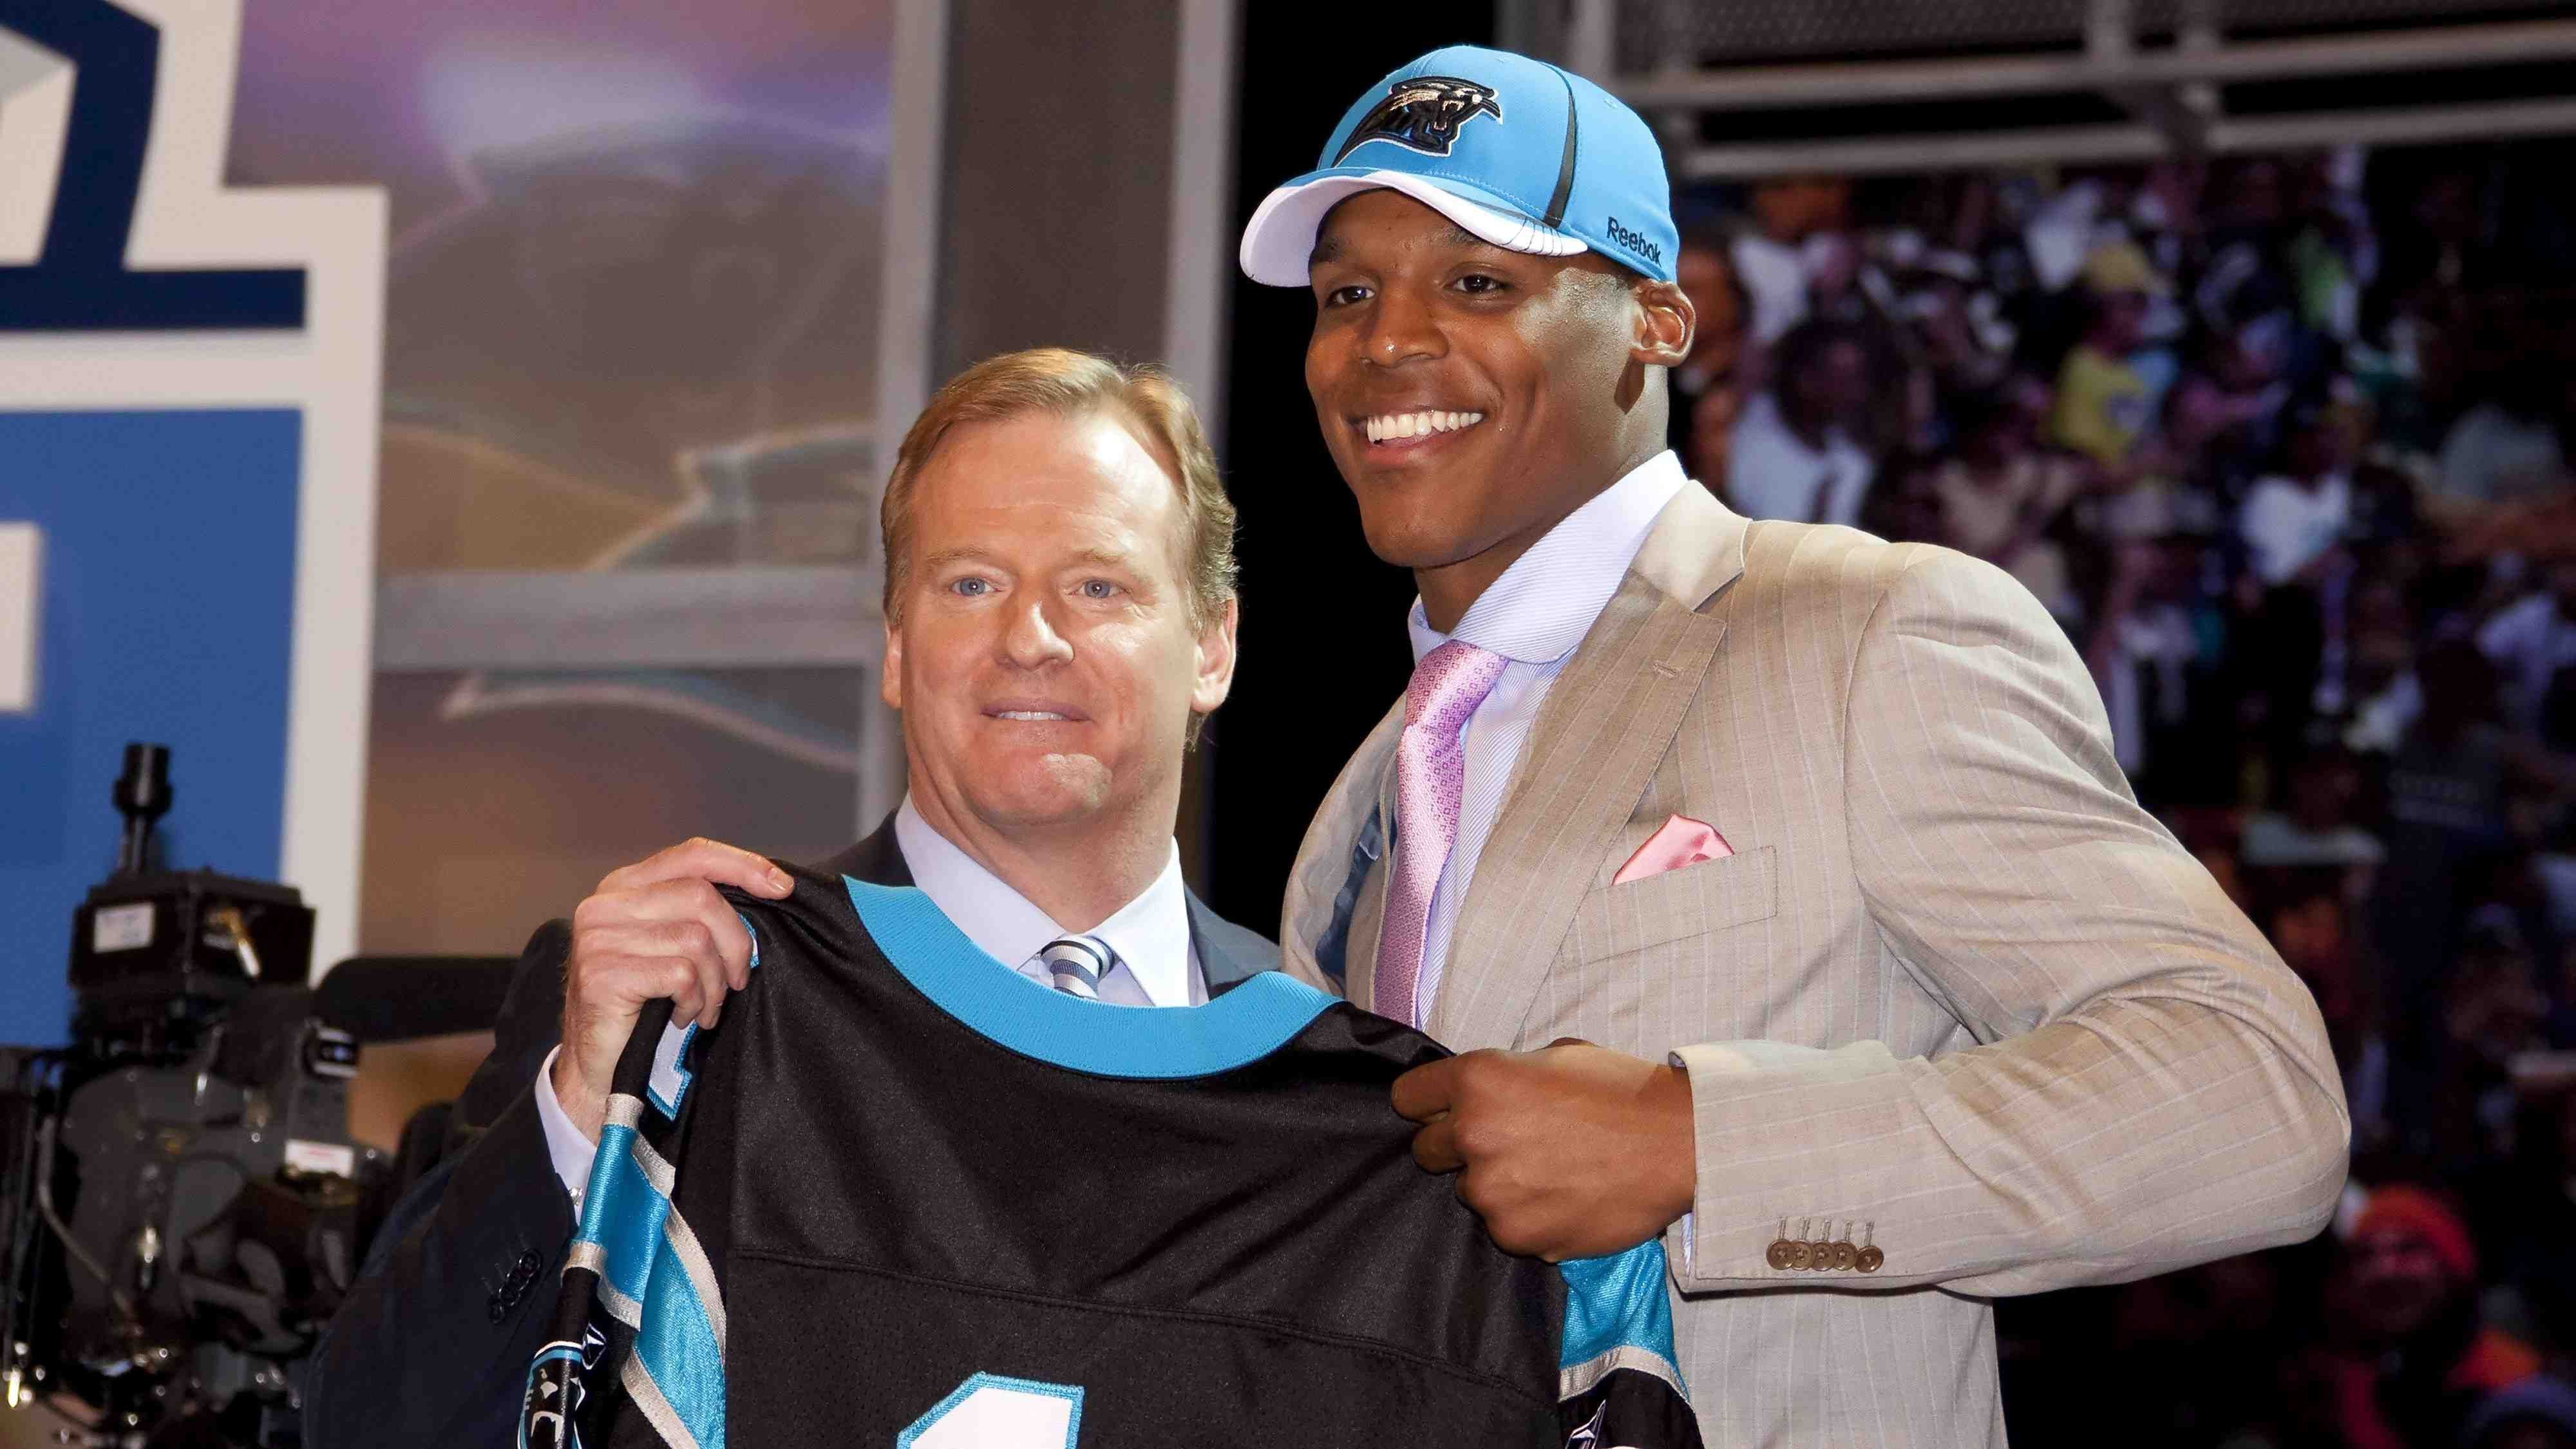 
                <strong>Cam Newton </strong><br>
                 - Draft: 2011 an 1. Stelle von den Carolina Panthers - Stationen: Carolina Panthers 2011 bis 2019, New England Patriots 2020 - Aktuell: Free Agent
              